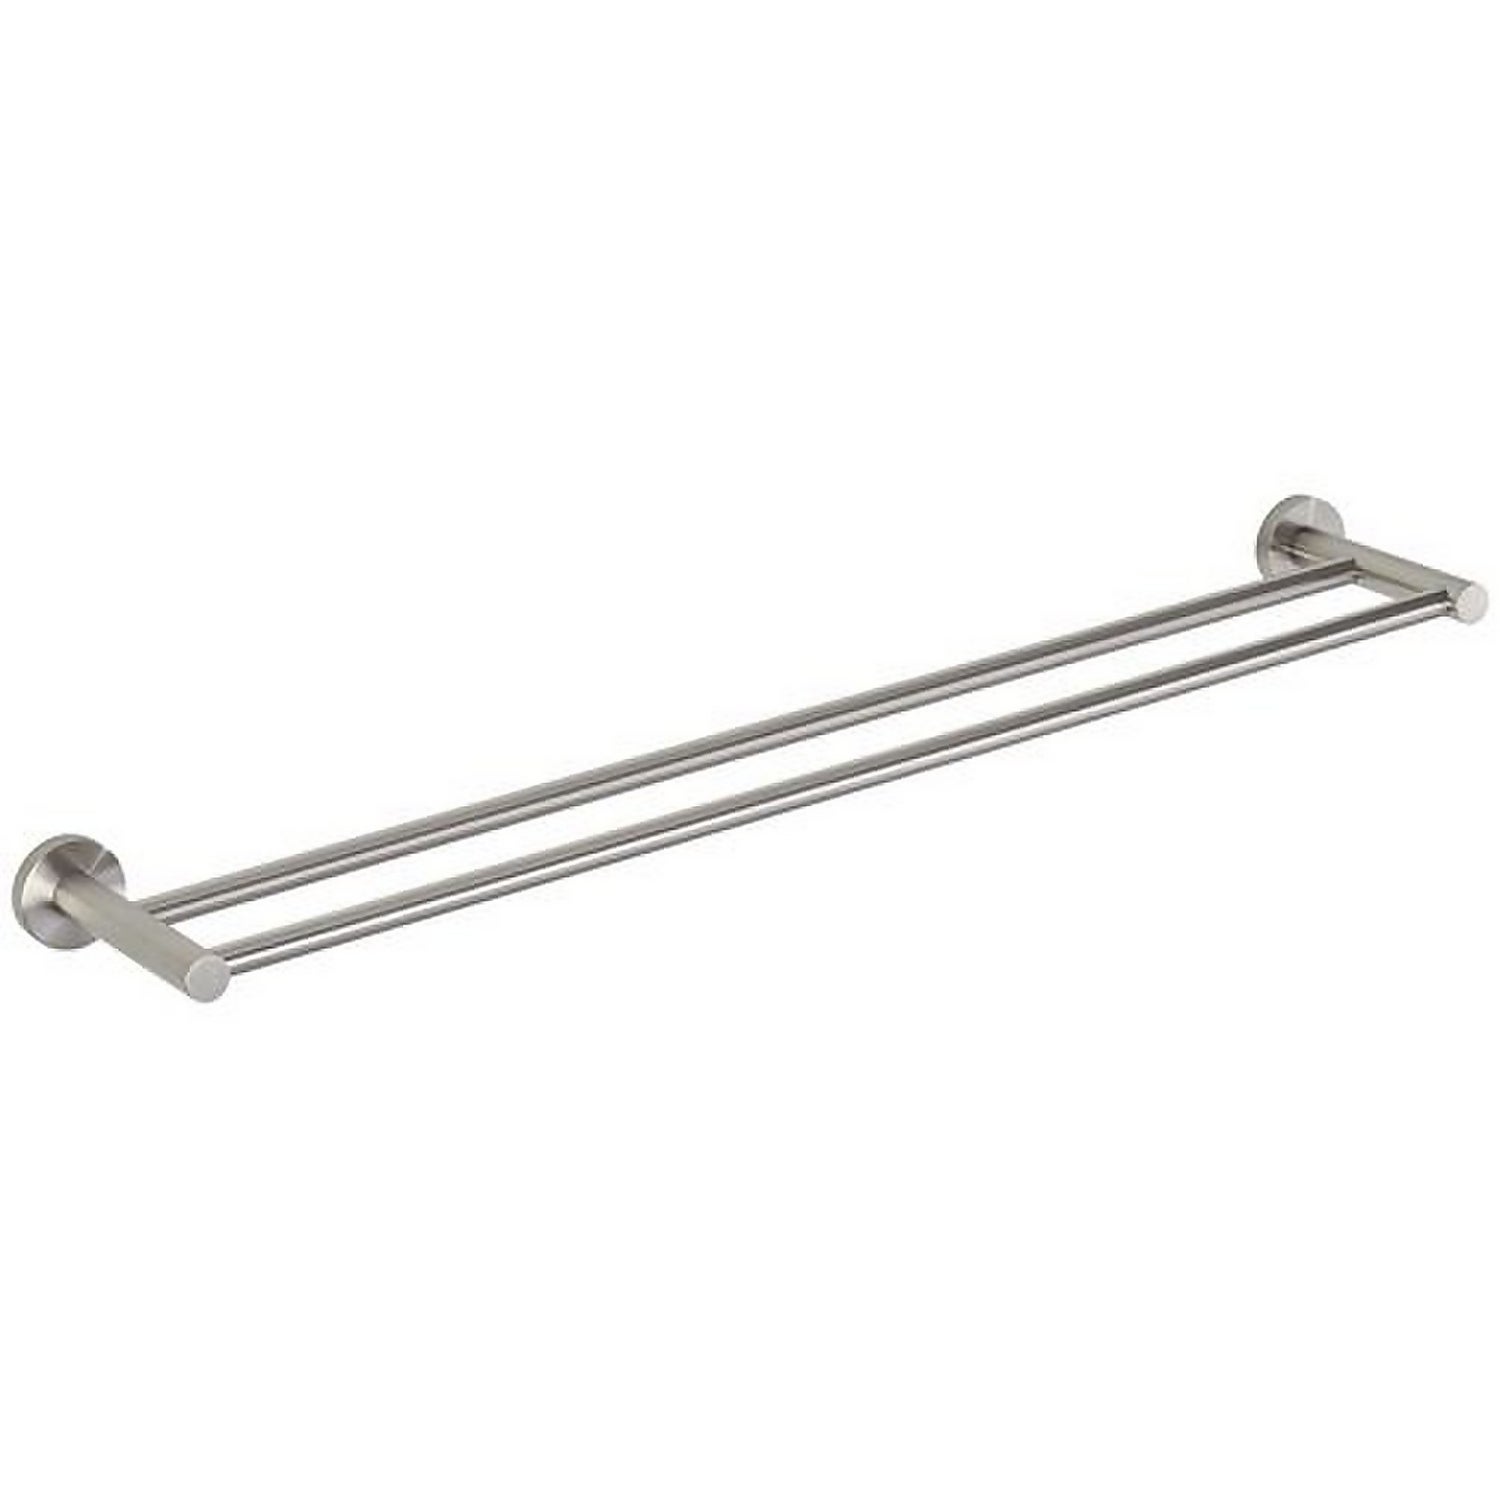 Forge Stainless Steel Double Towel Rail